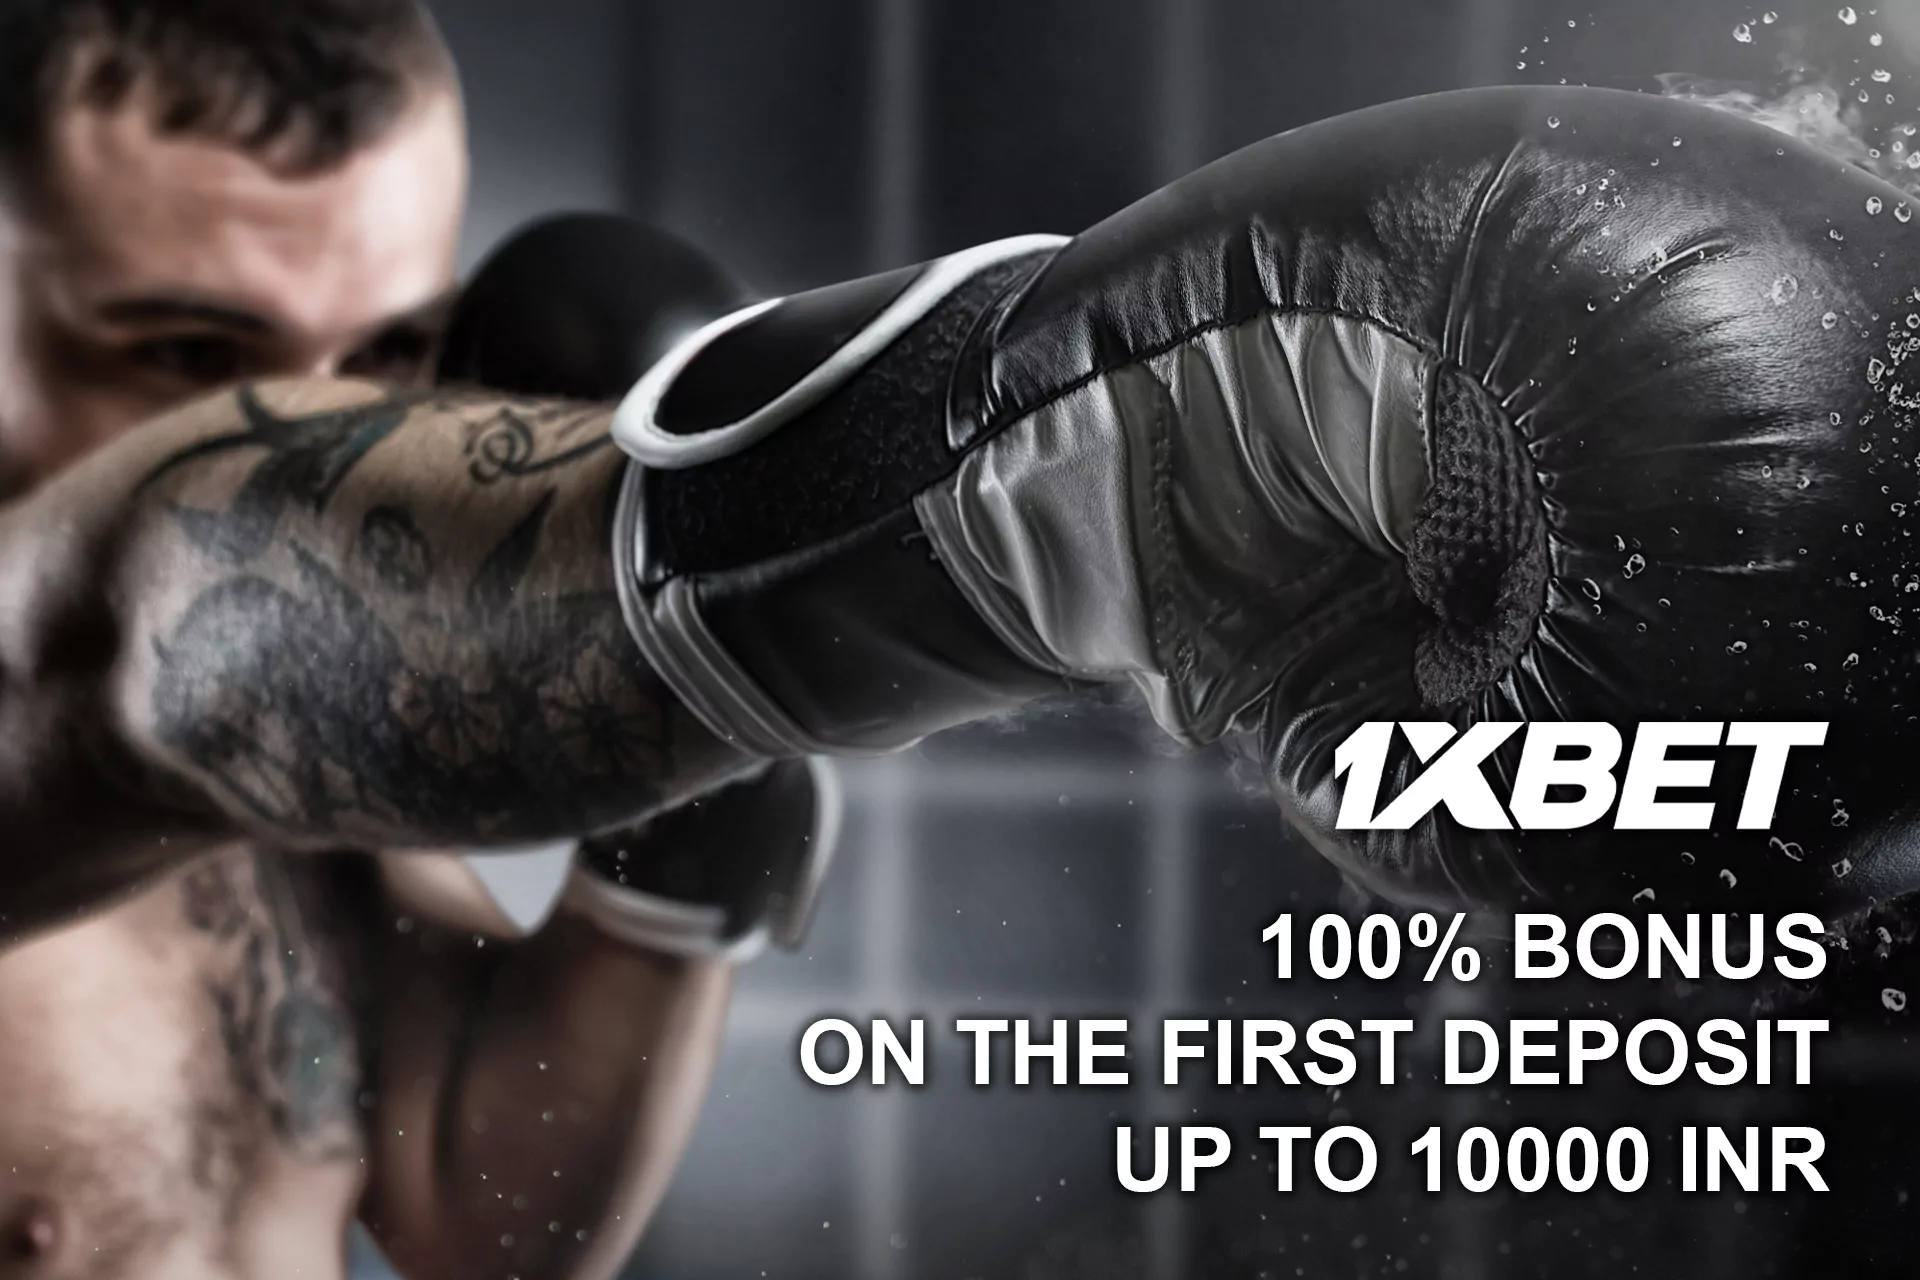 Make your first deposit and get a welcome bonus for boxing bets.